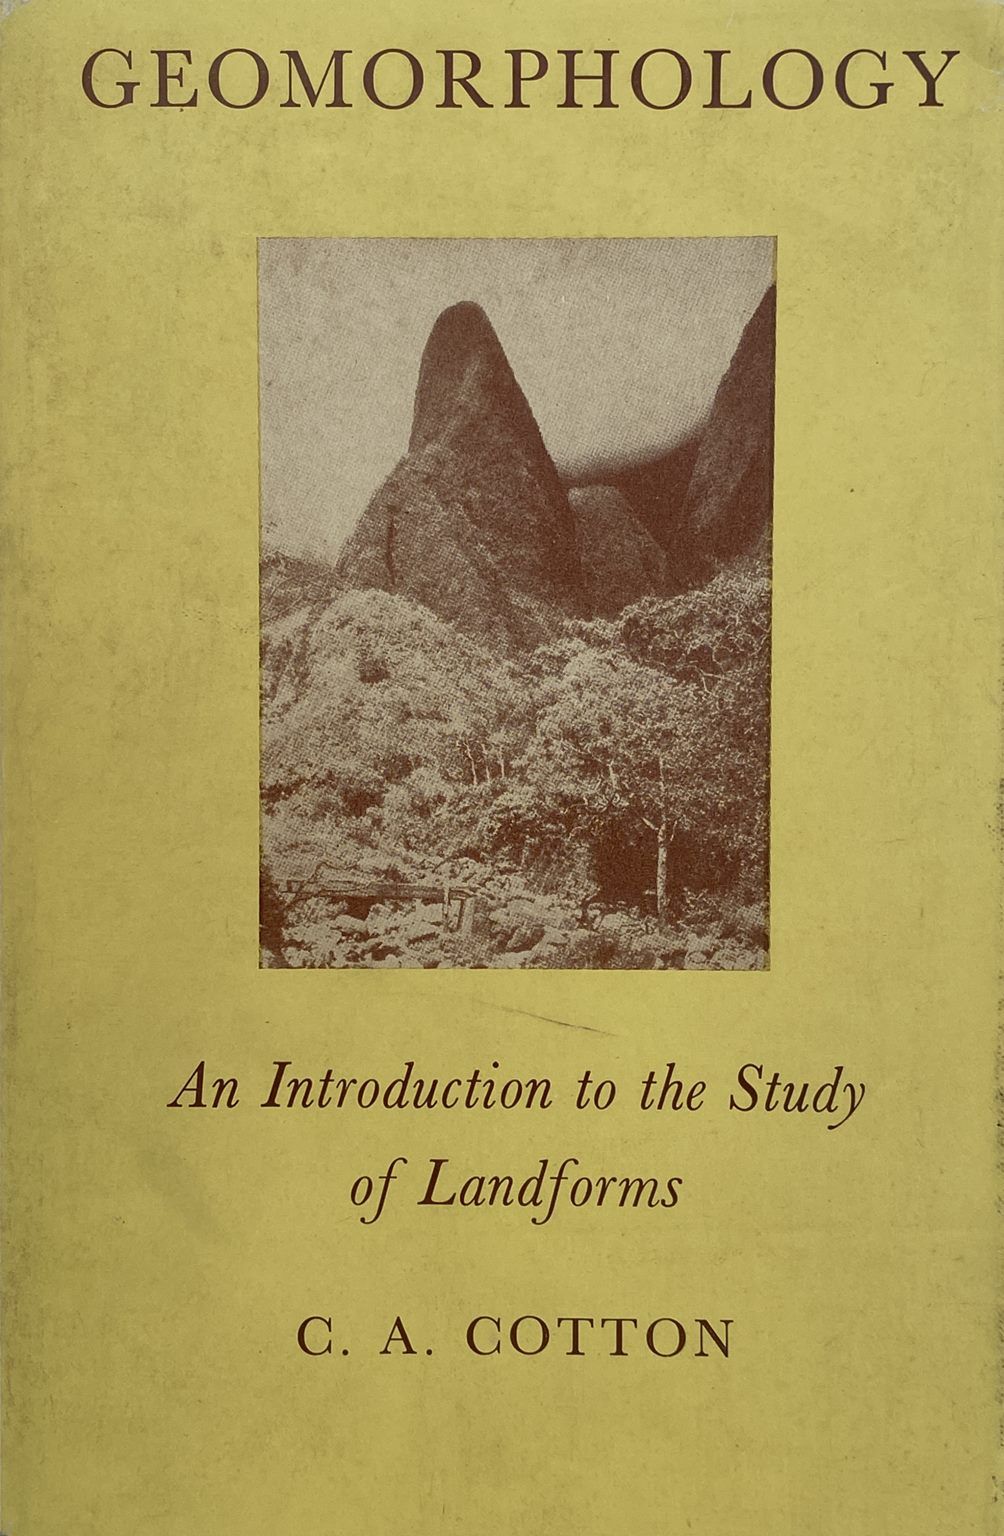 GEOMORPHOLOGY: An Introduction to the study of landforms